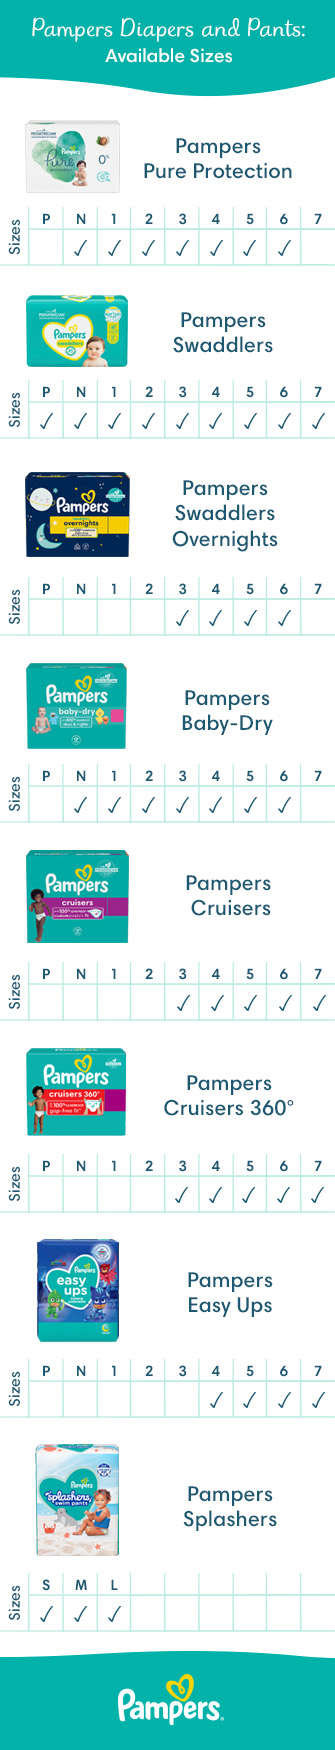 Pampers US Diaper Size 335pix 